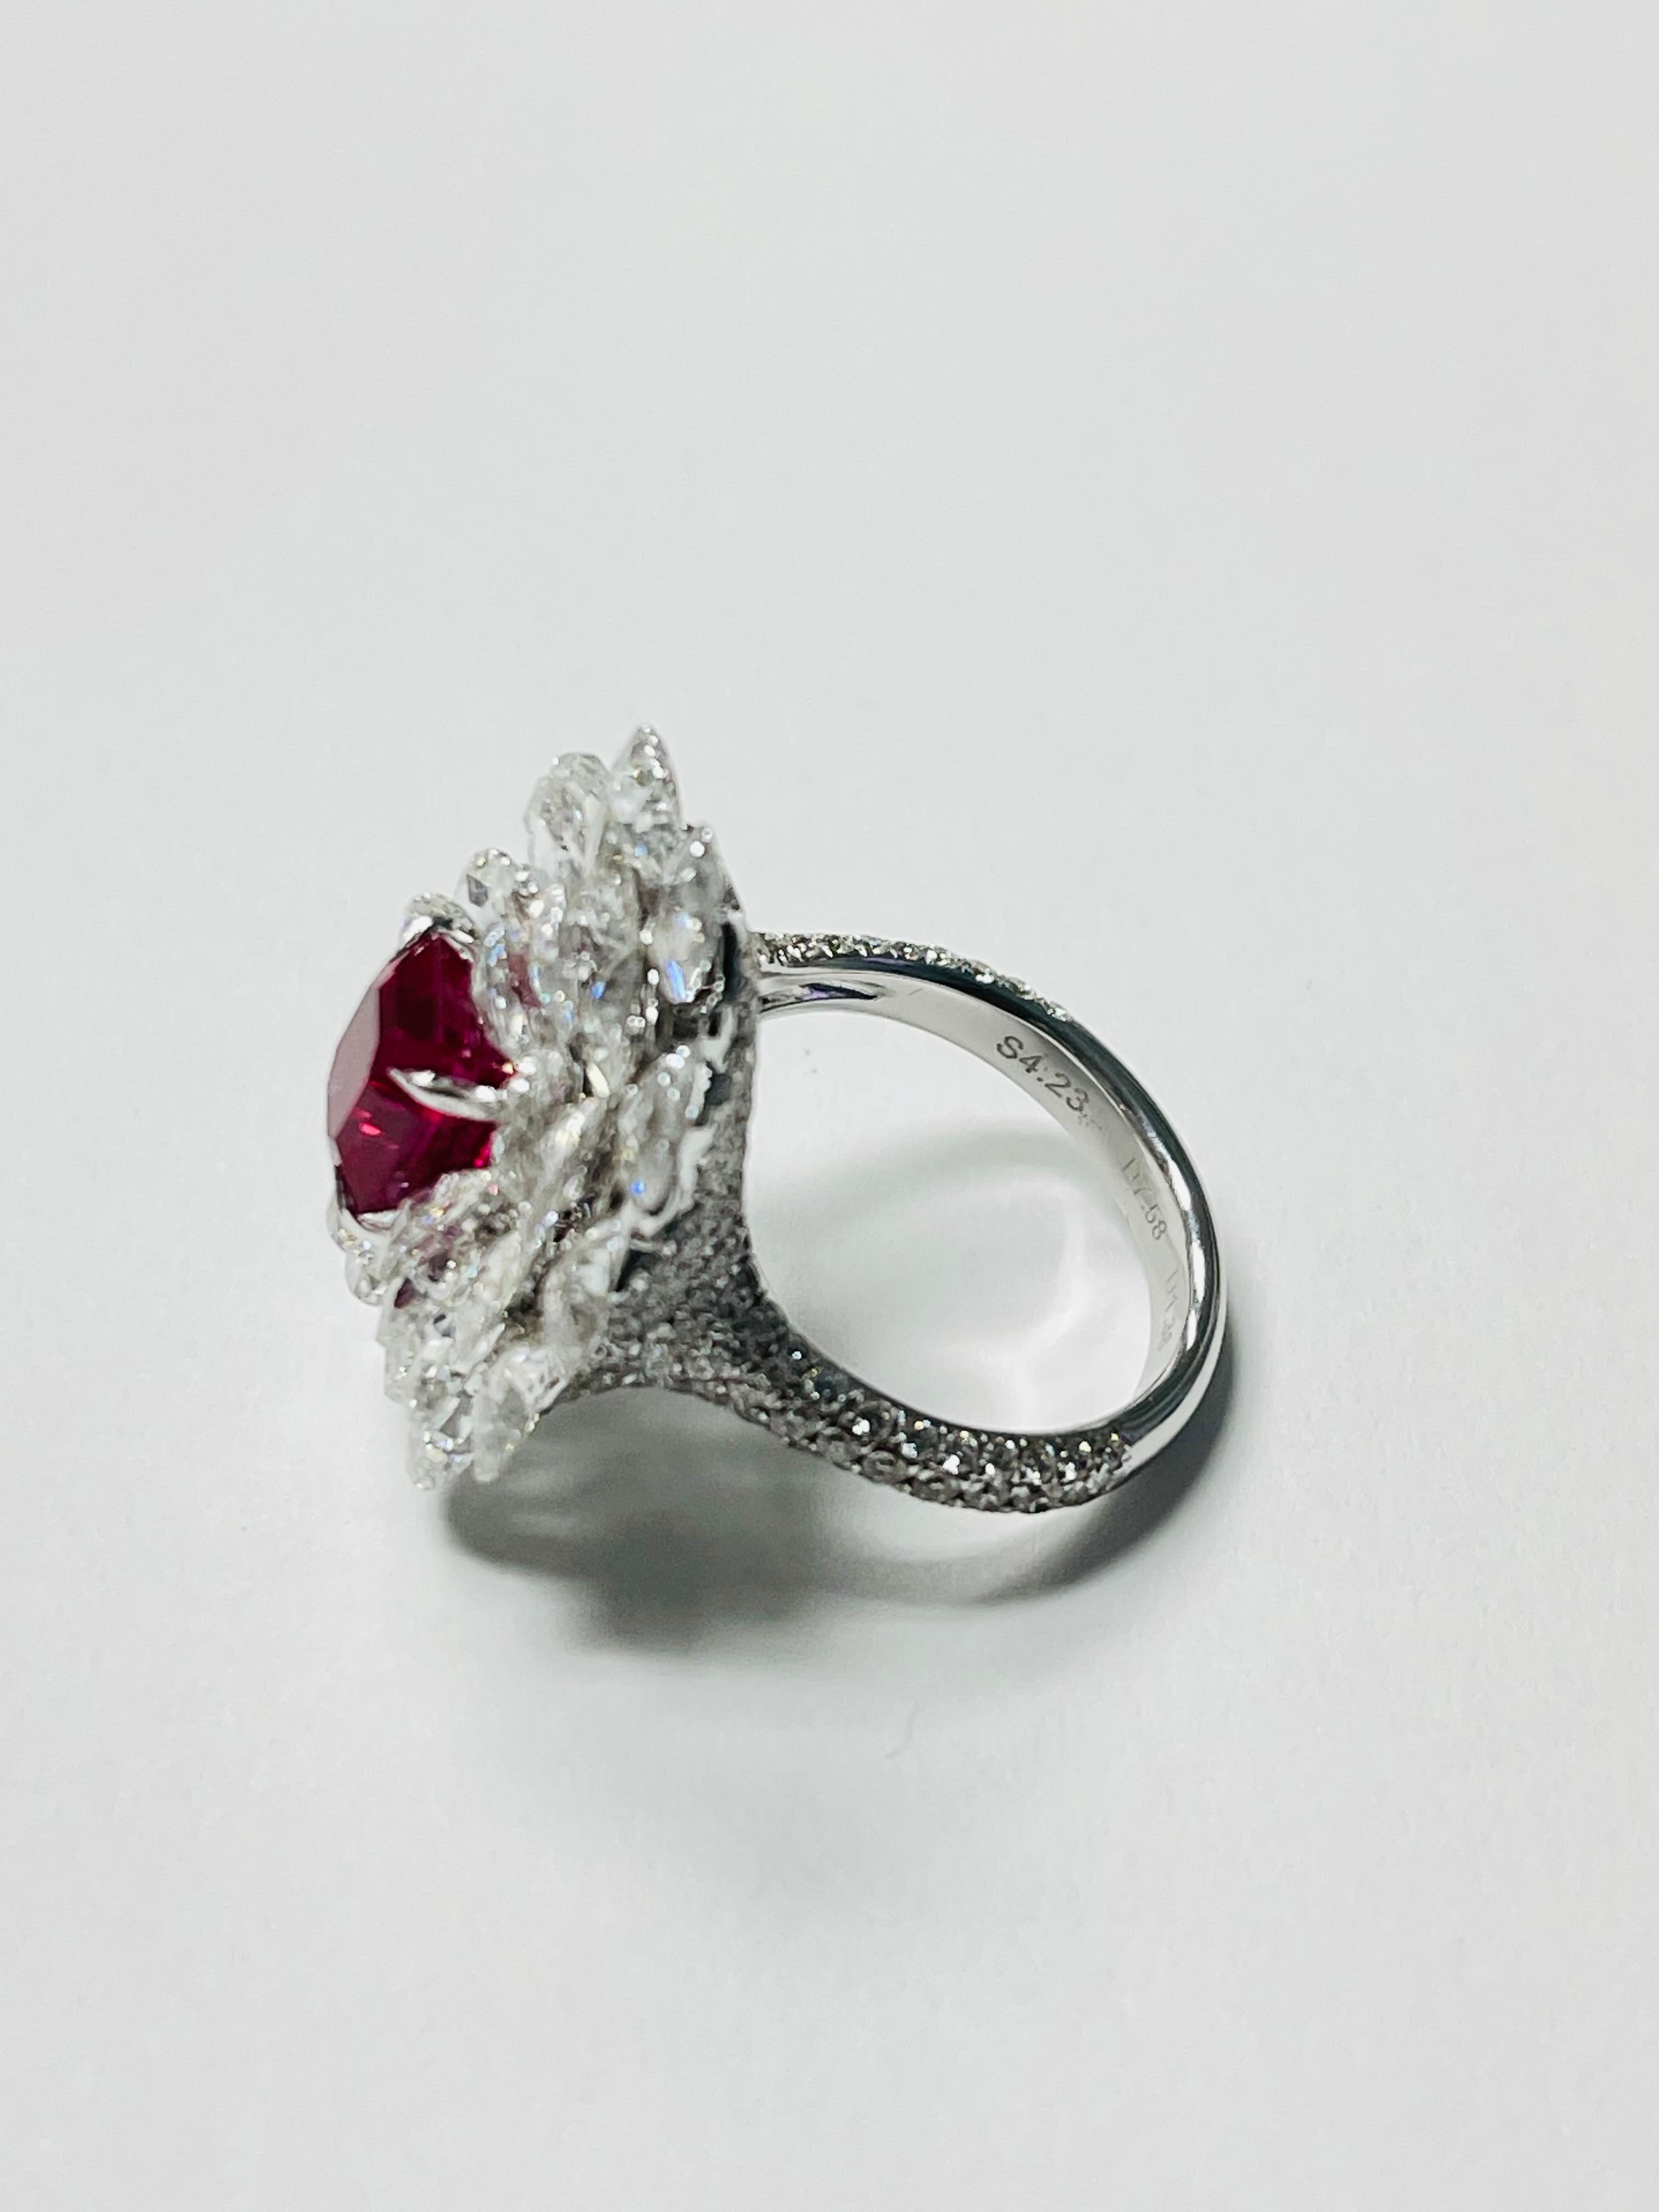   Ruby And Diamond Ring , BURMA NO HEAT GUBELIN AND GIA CERTIFIED  For Sale 1